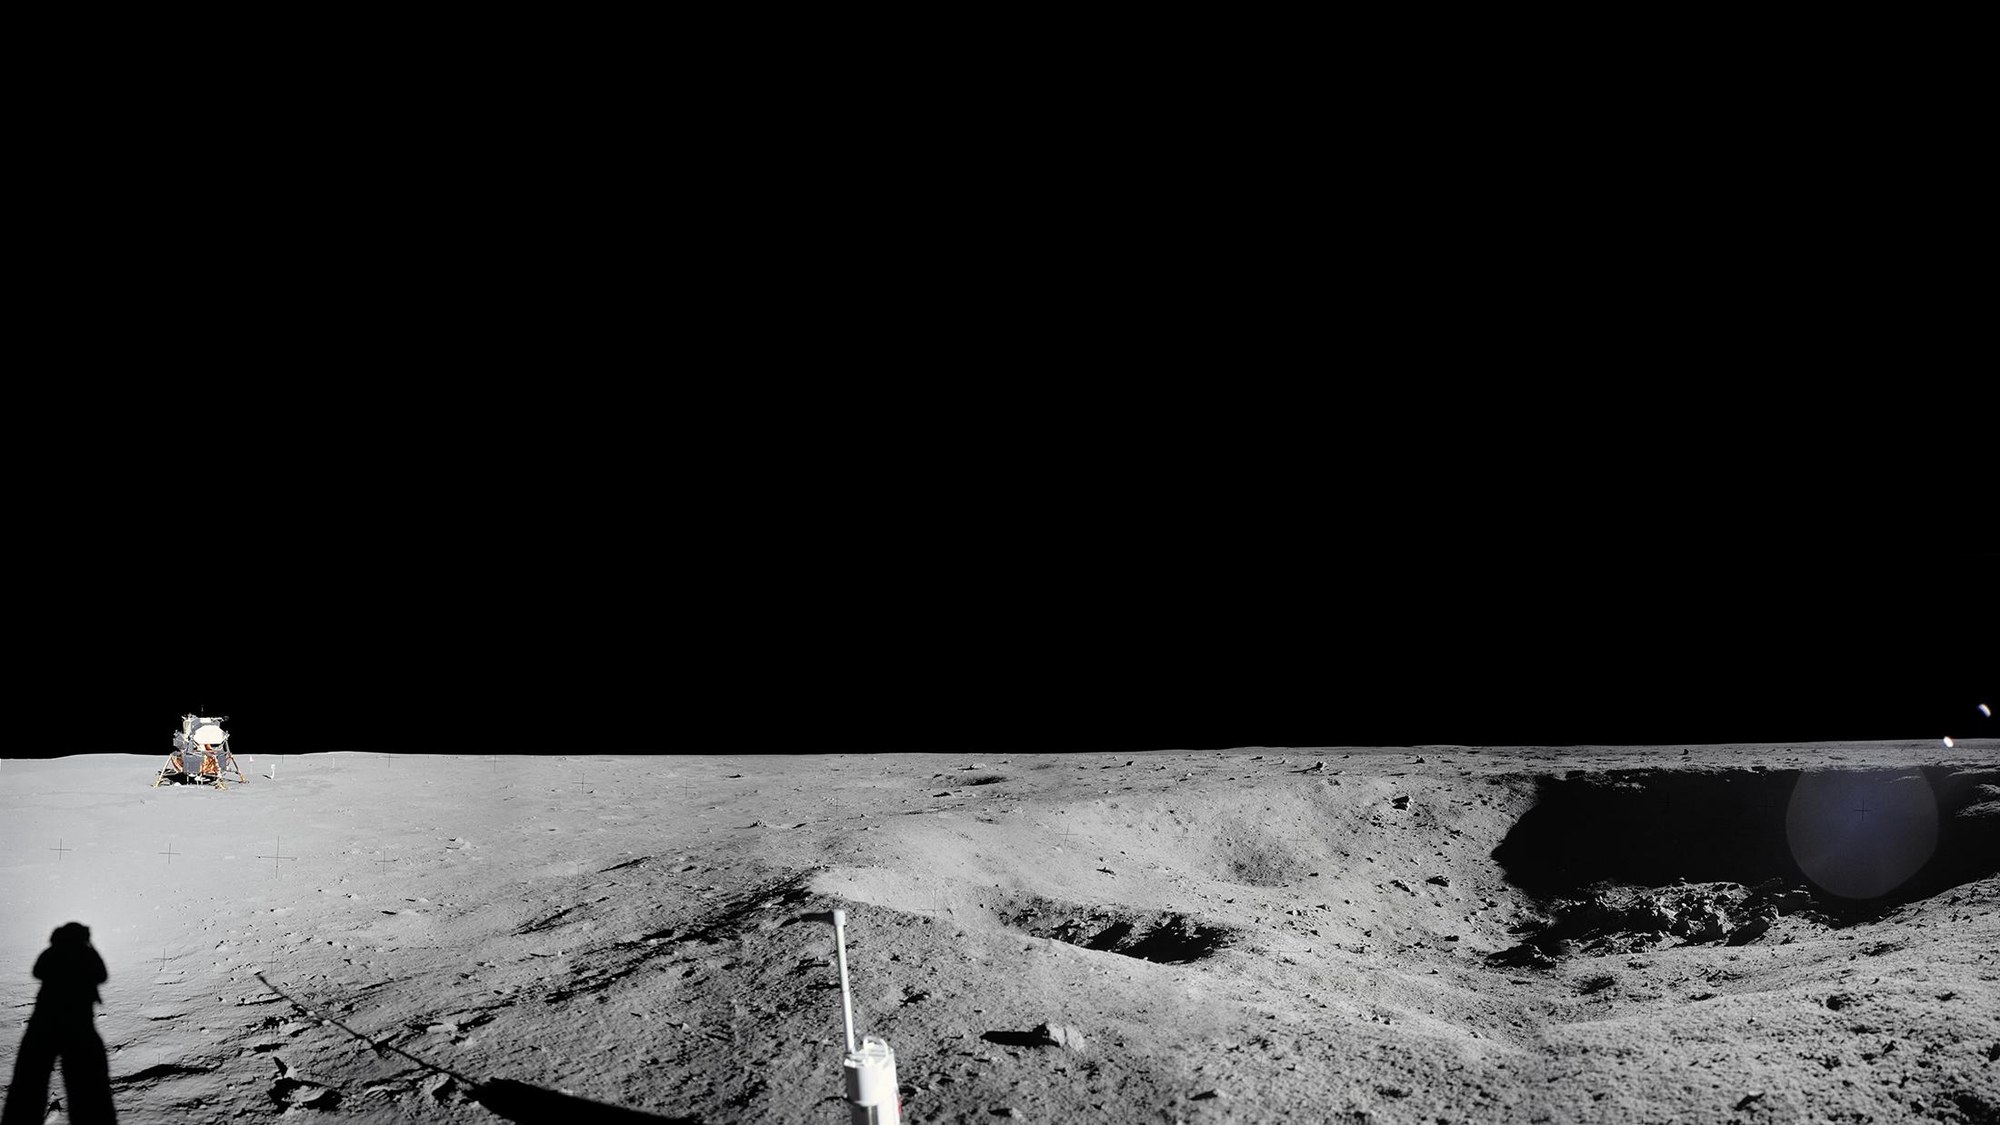 Panoramic view of the Apollo 11 landing site from Little West Crater